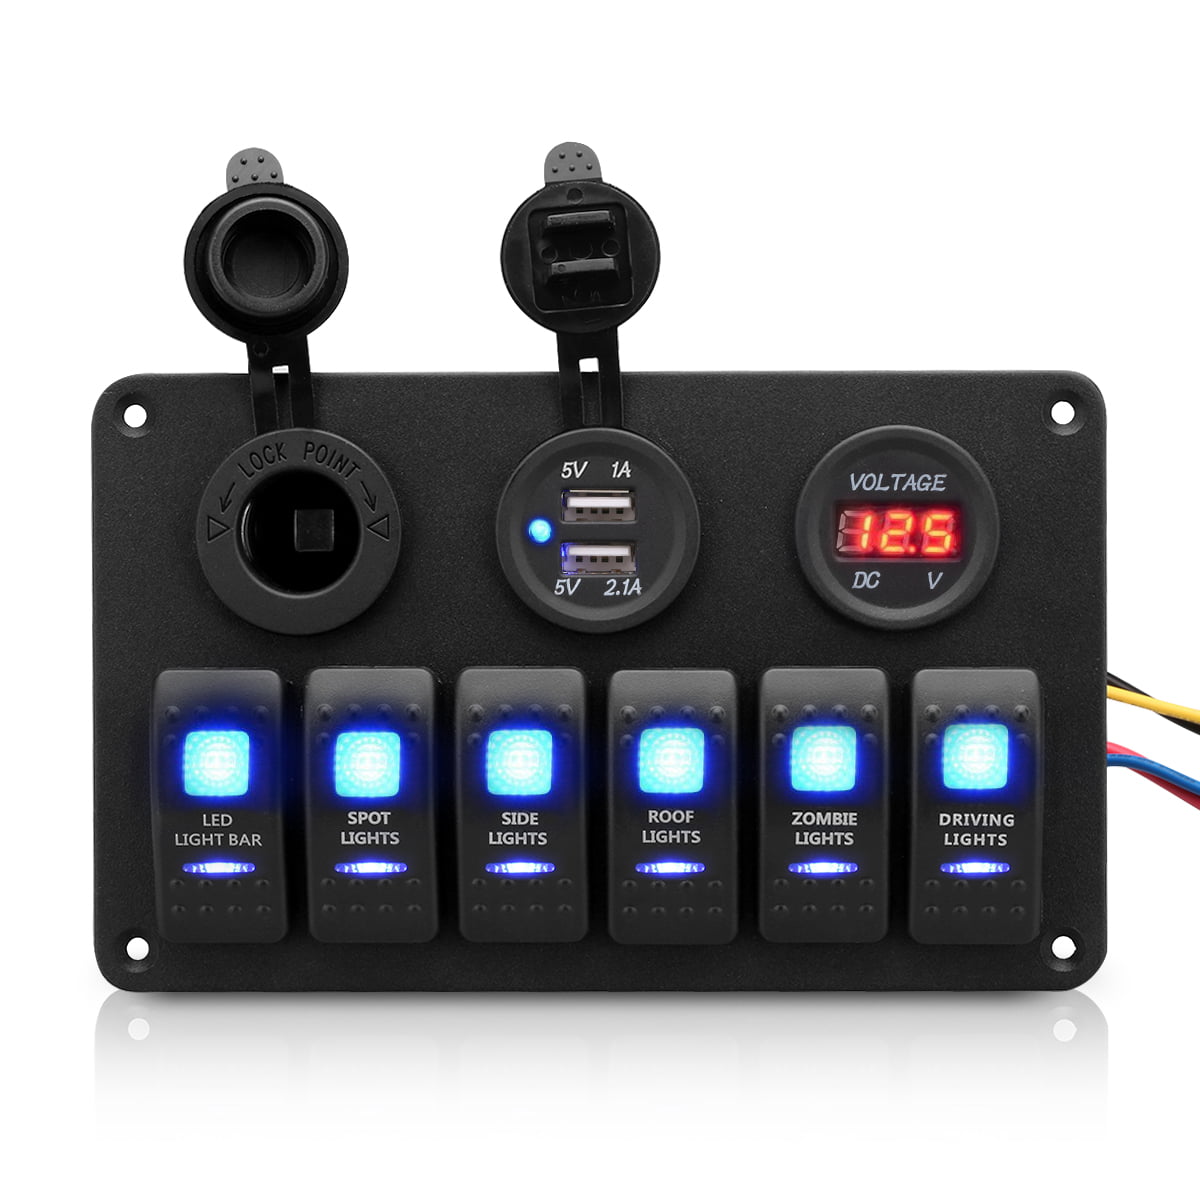 Amarine-made Waterproof Marine Electric Led Toggle Switch Panel With 1 Power Socket for Boat and RV 